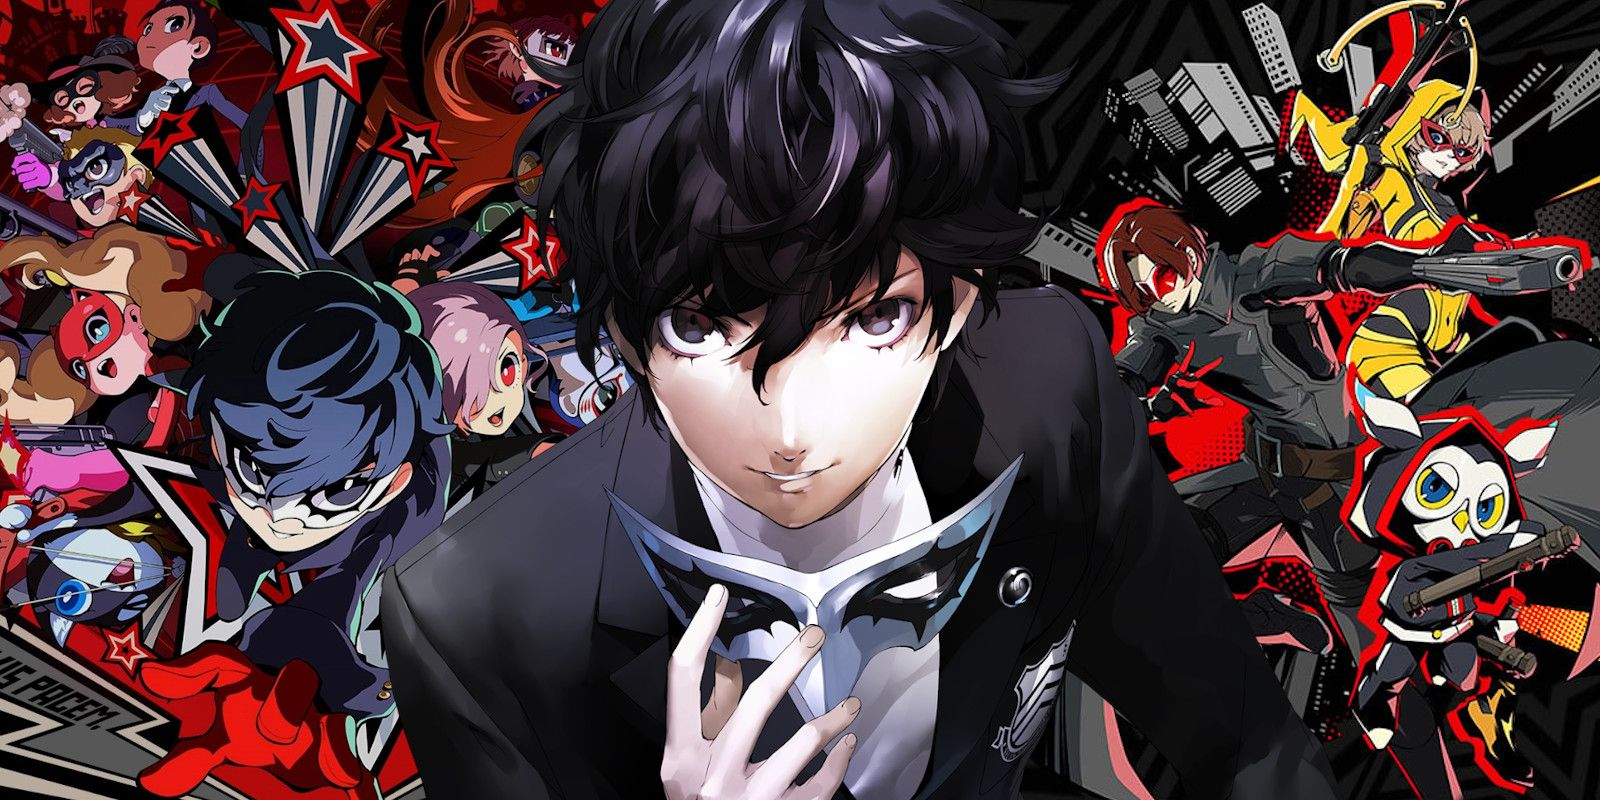 Atlus is Relying Too Much on the Persona 5 RPG